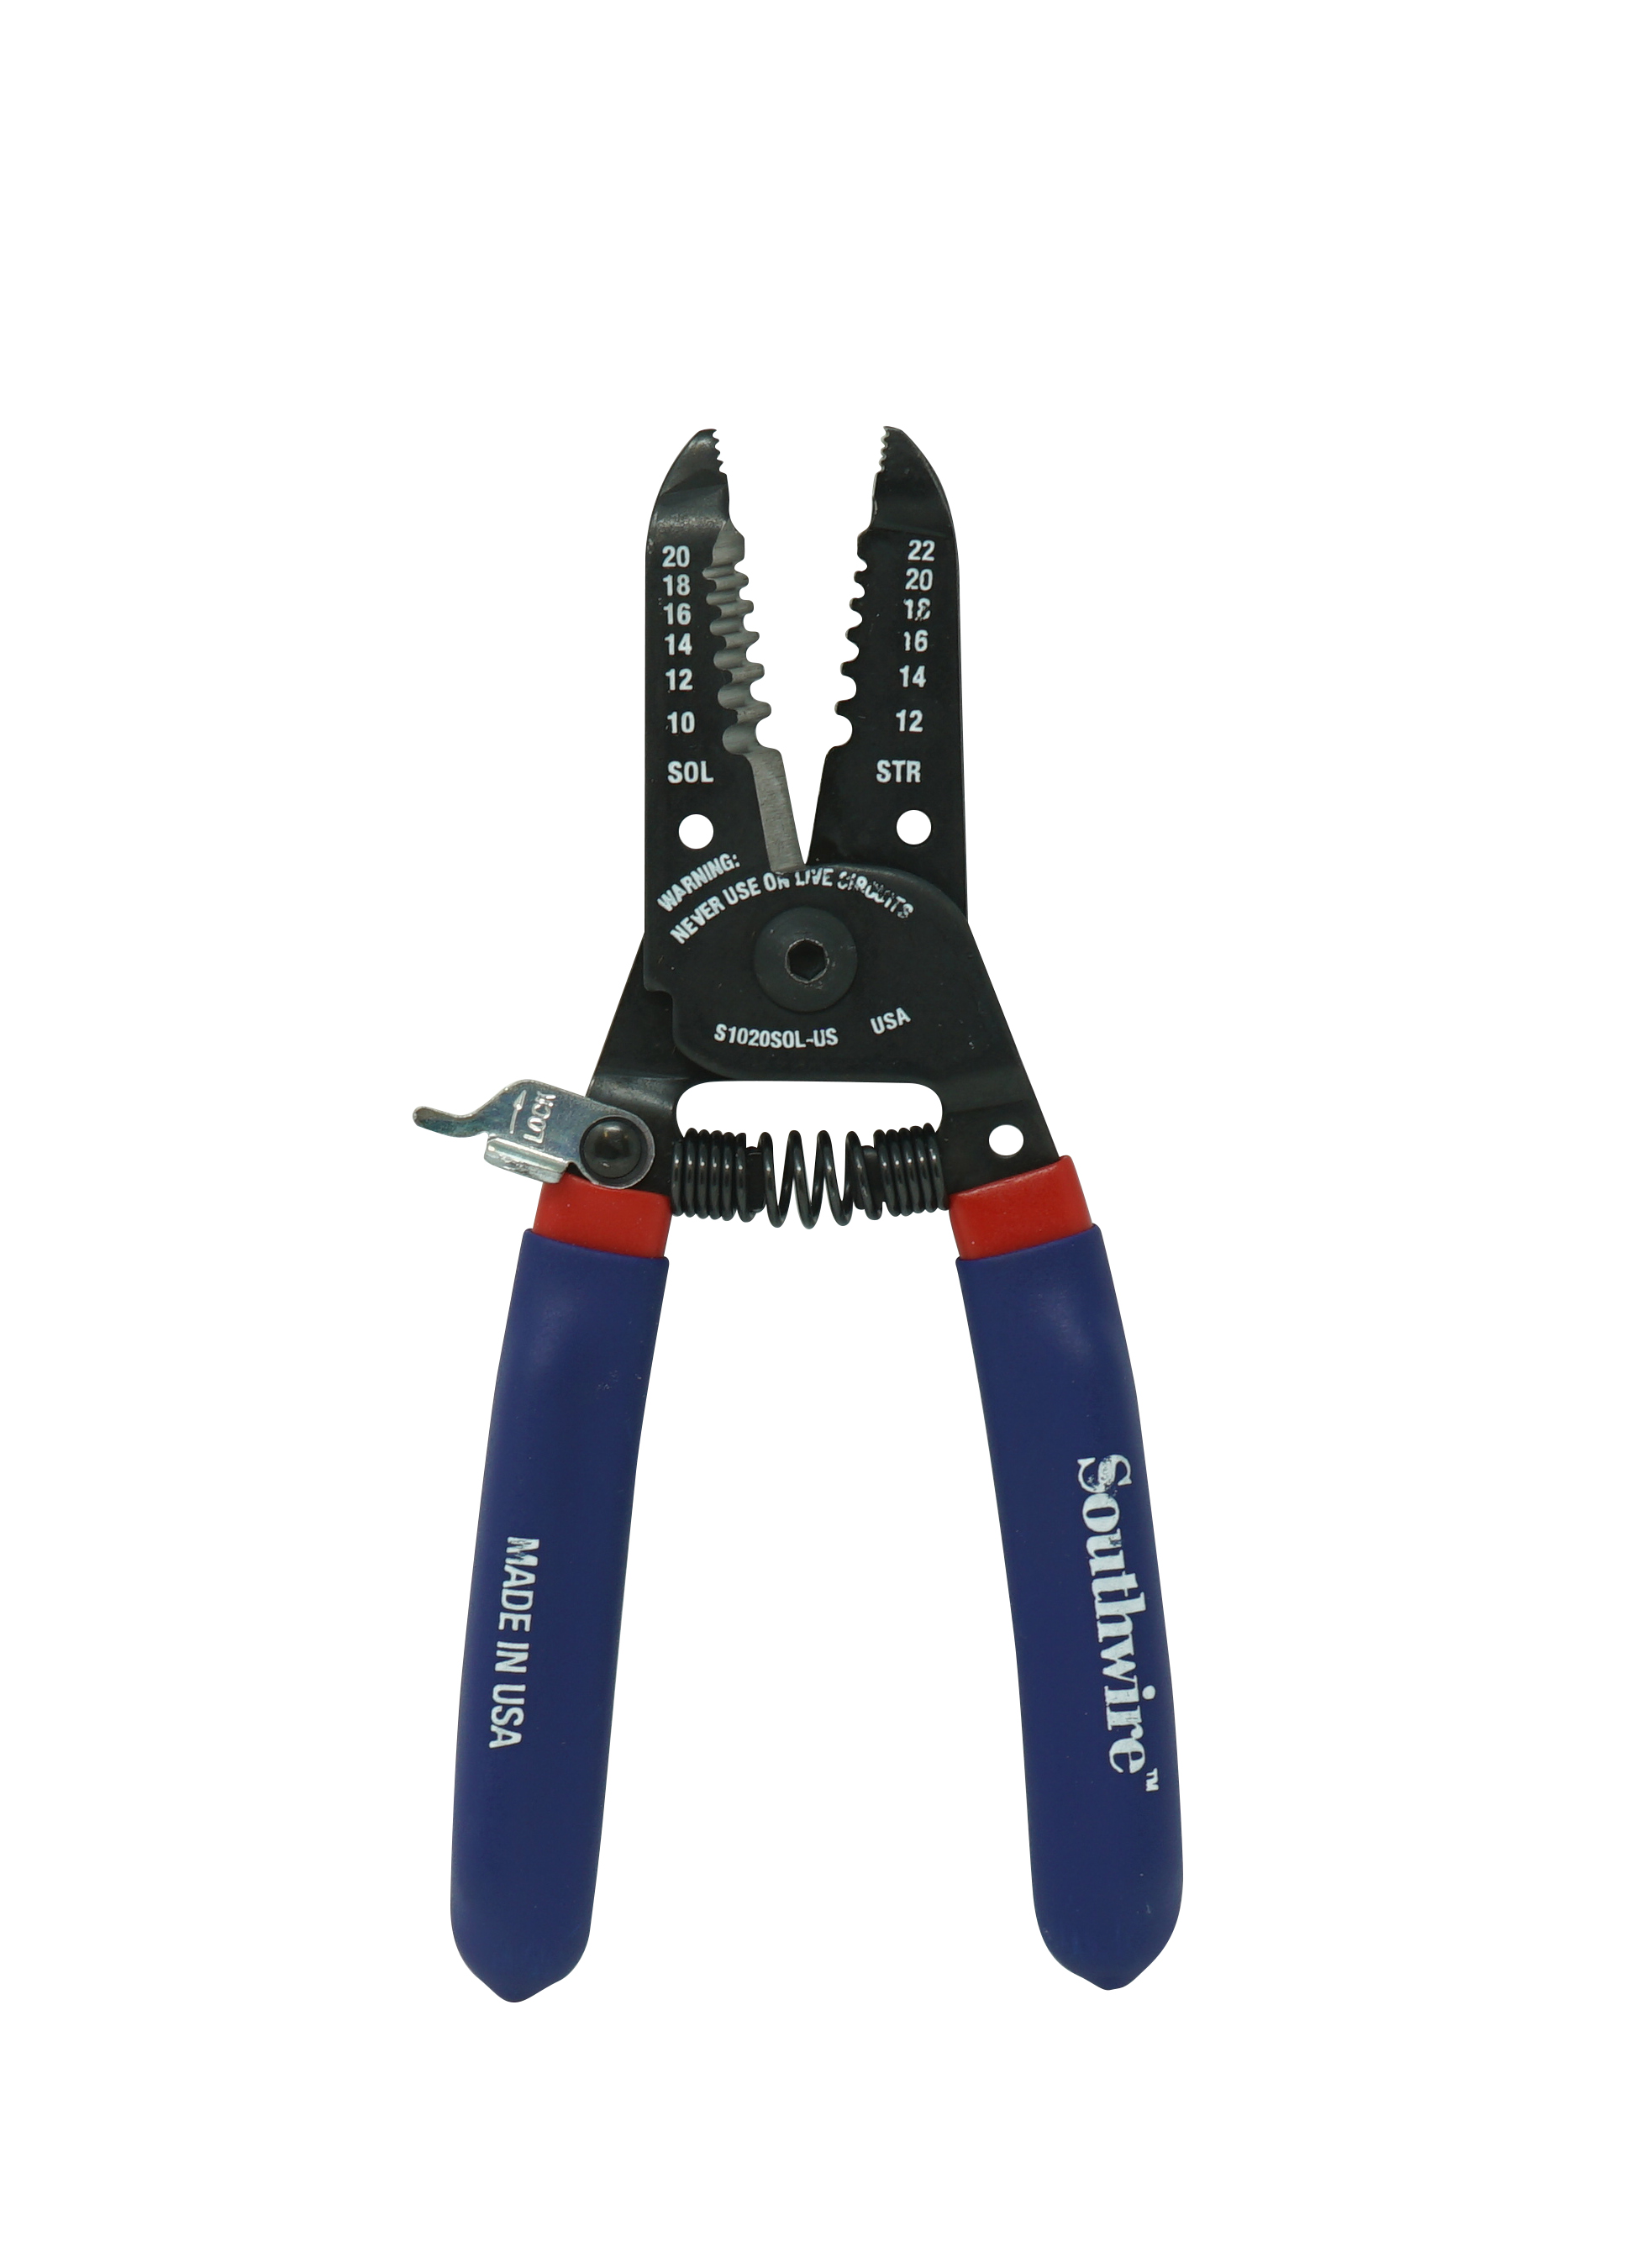 Made from durable heat-treated steel. Equipped to withstand any jobsite. It strips and cuts up to 10-20 AWG solid and 12-22 AWG solid wire. These wire strippers are made for the professional. Our tradesmen and women meet every job with heart and pride. Their tools should, too.